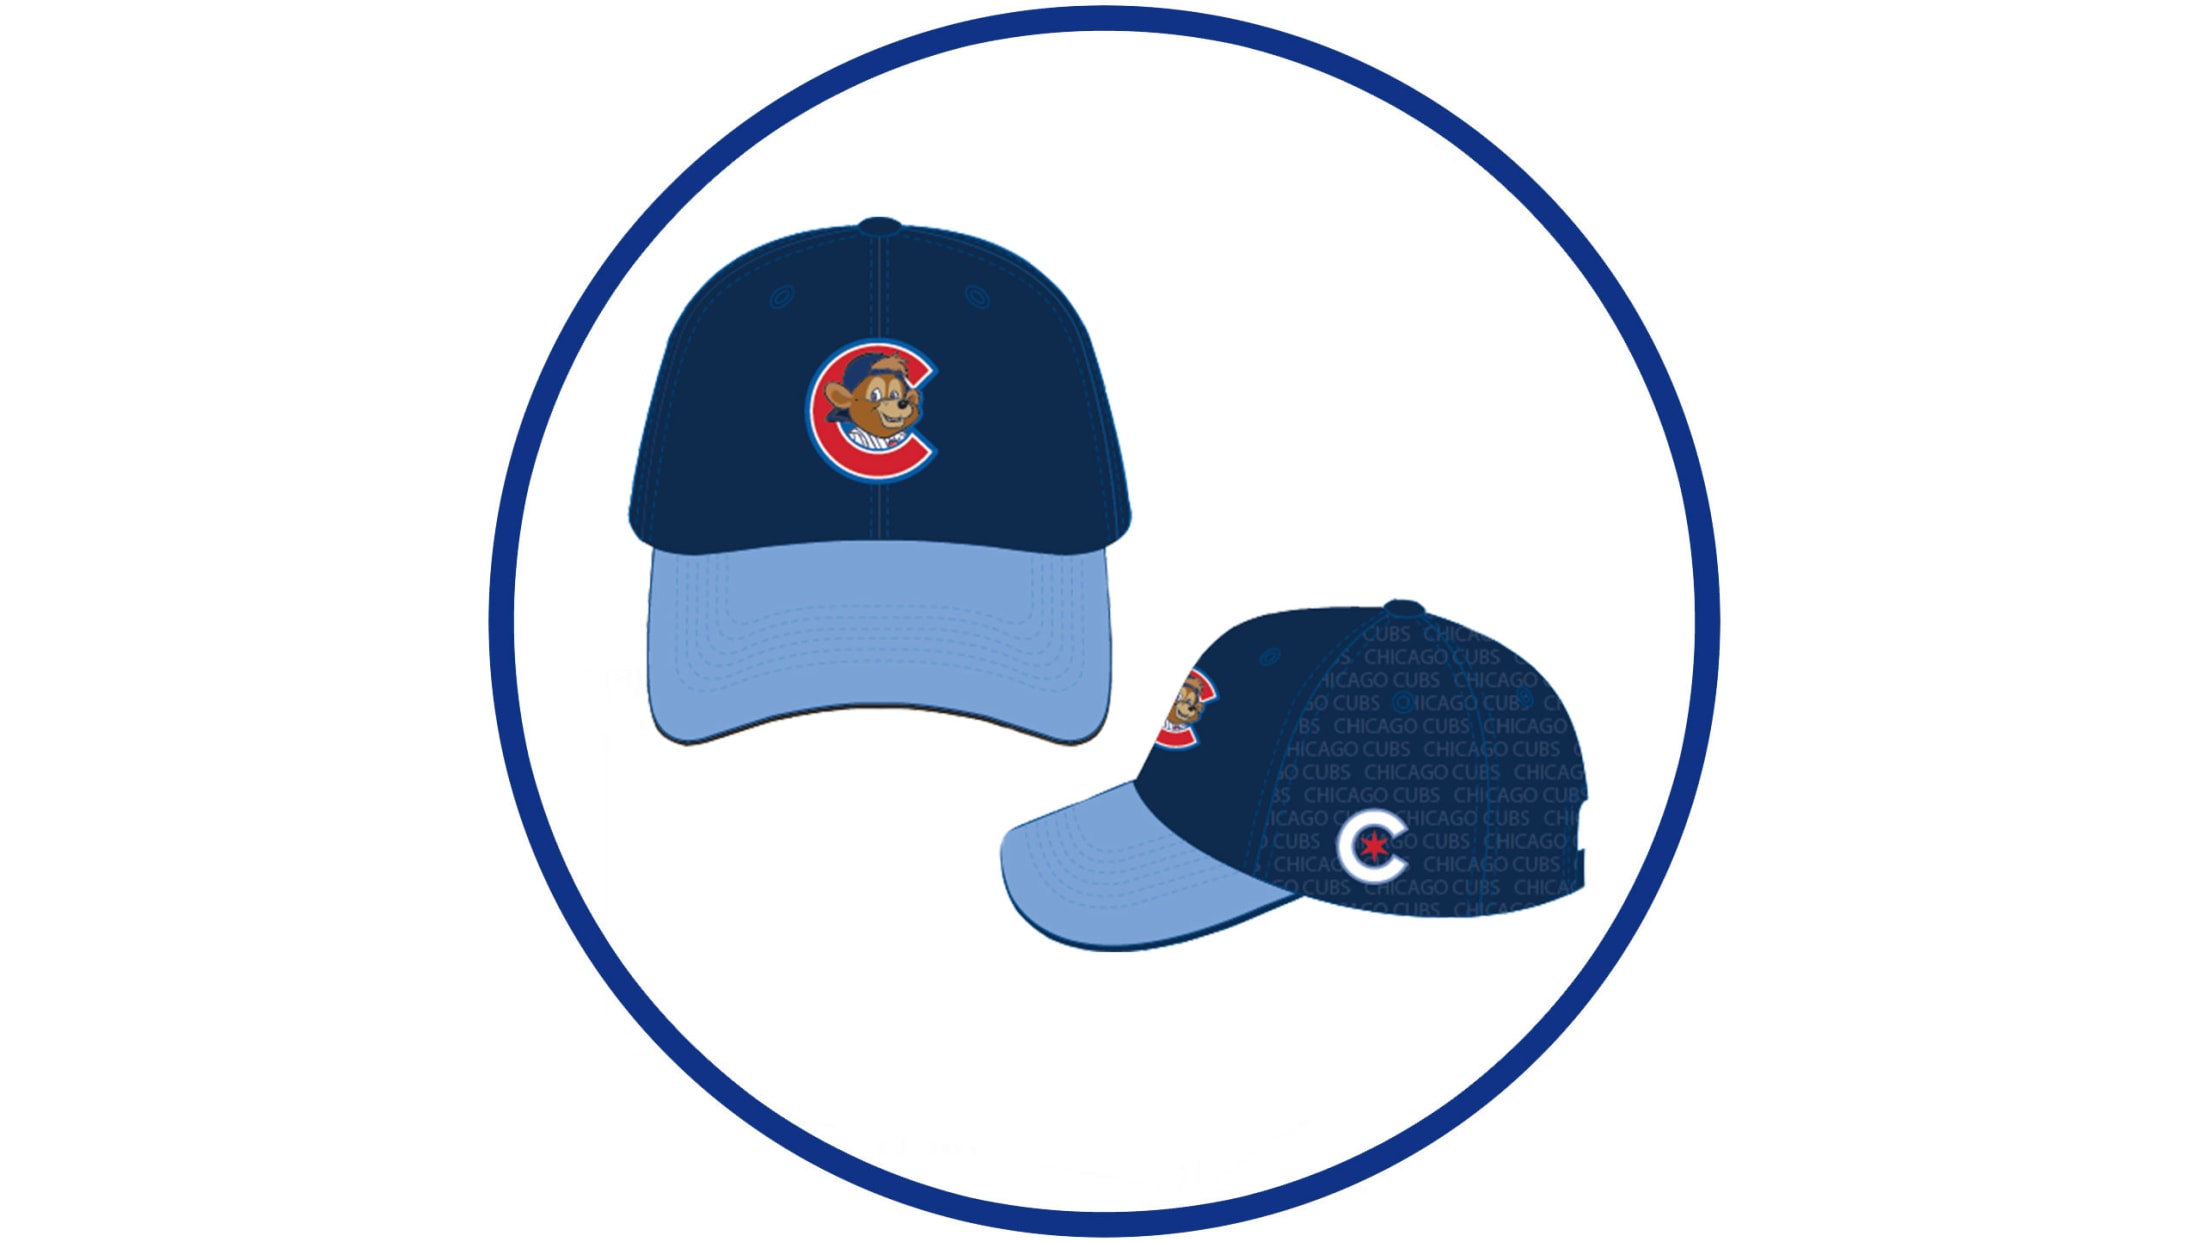 Chicago Cubs NB/IN Creeper Boys Set - Clark Street Sports